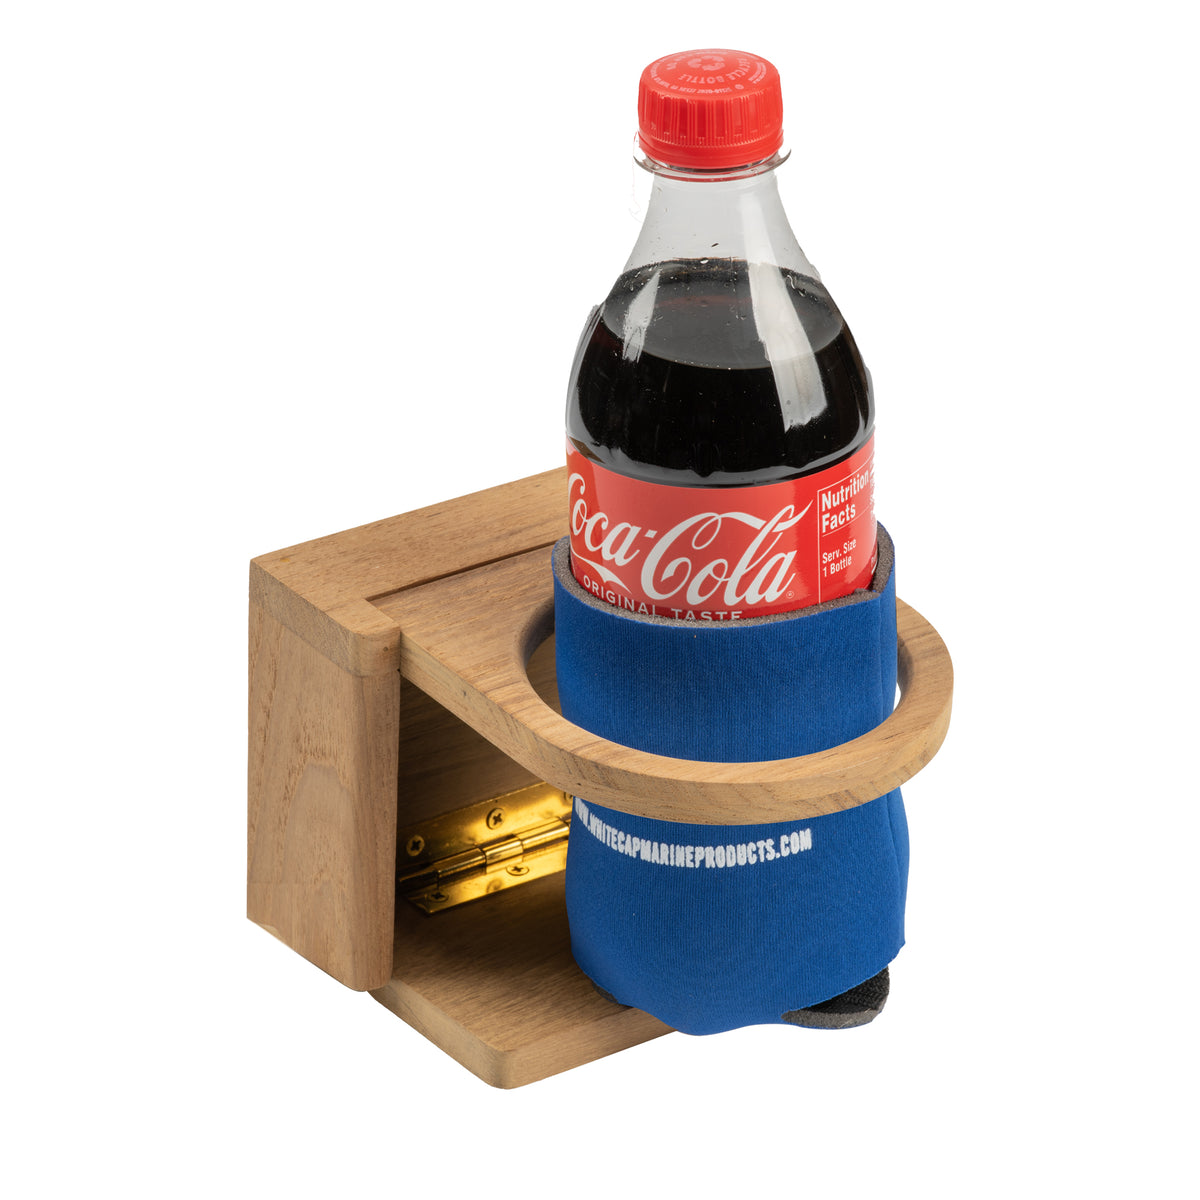 Folding Insulated Drink Holder - 62602